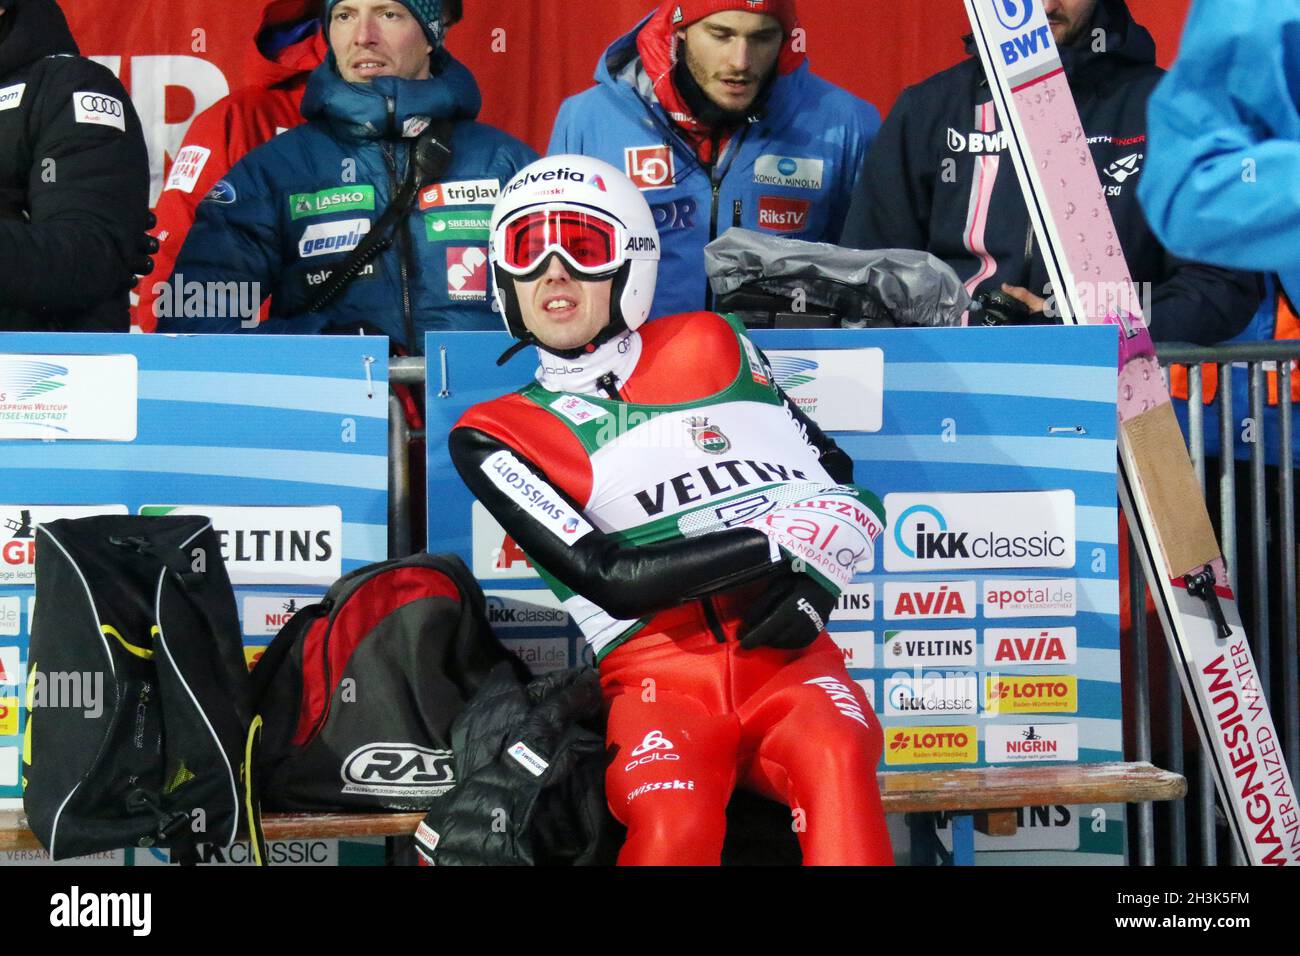 FIS World Cup Ski Jumping 17-18, Neustadt, Team competition Stock Photo